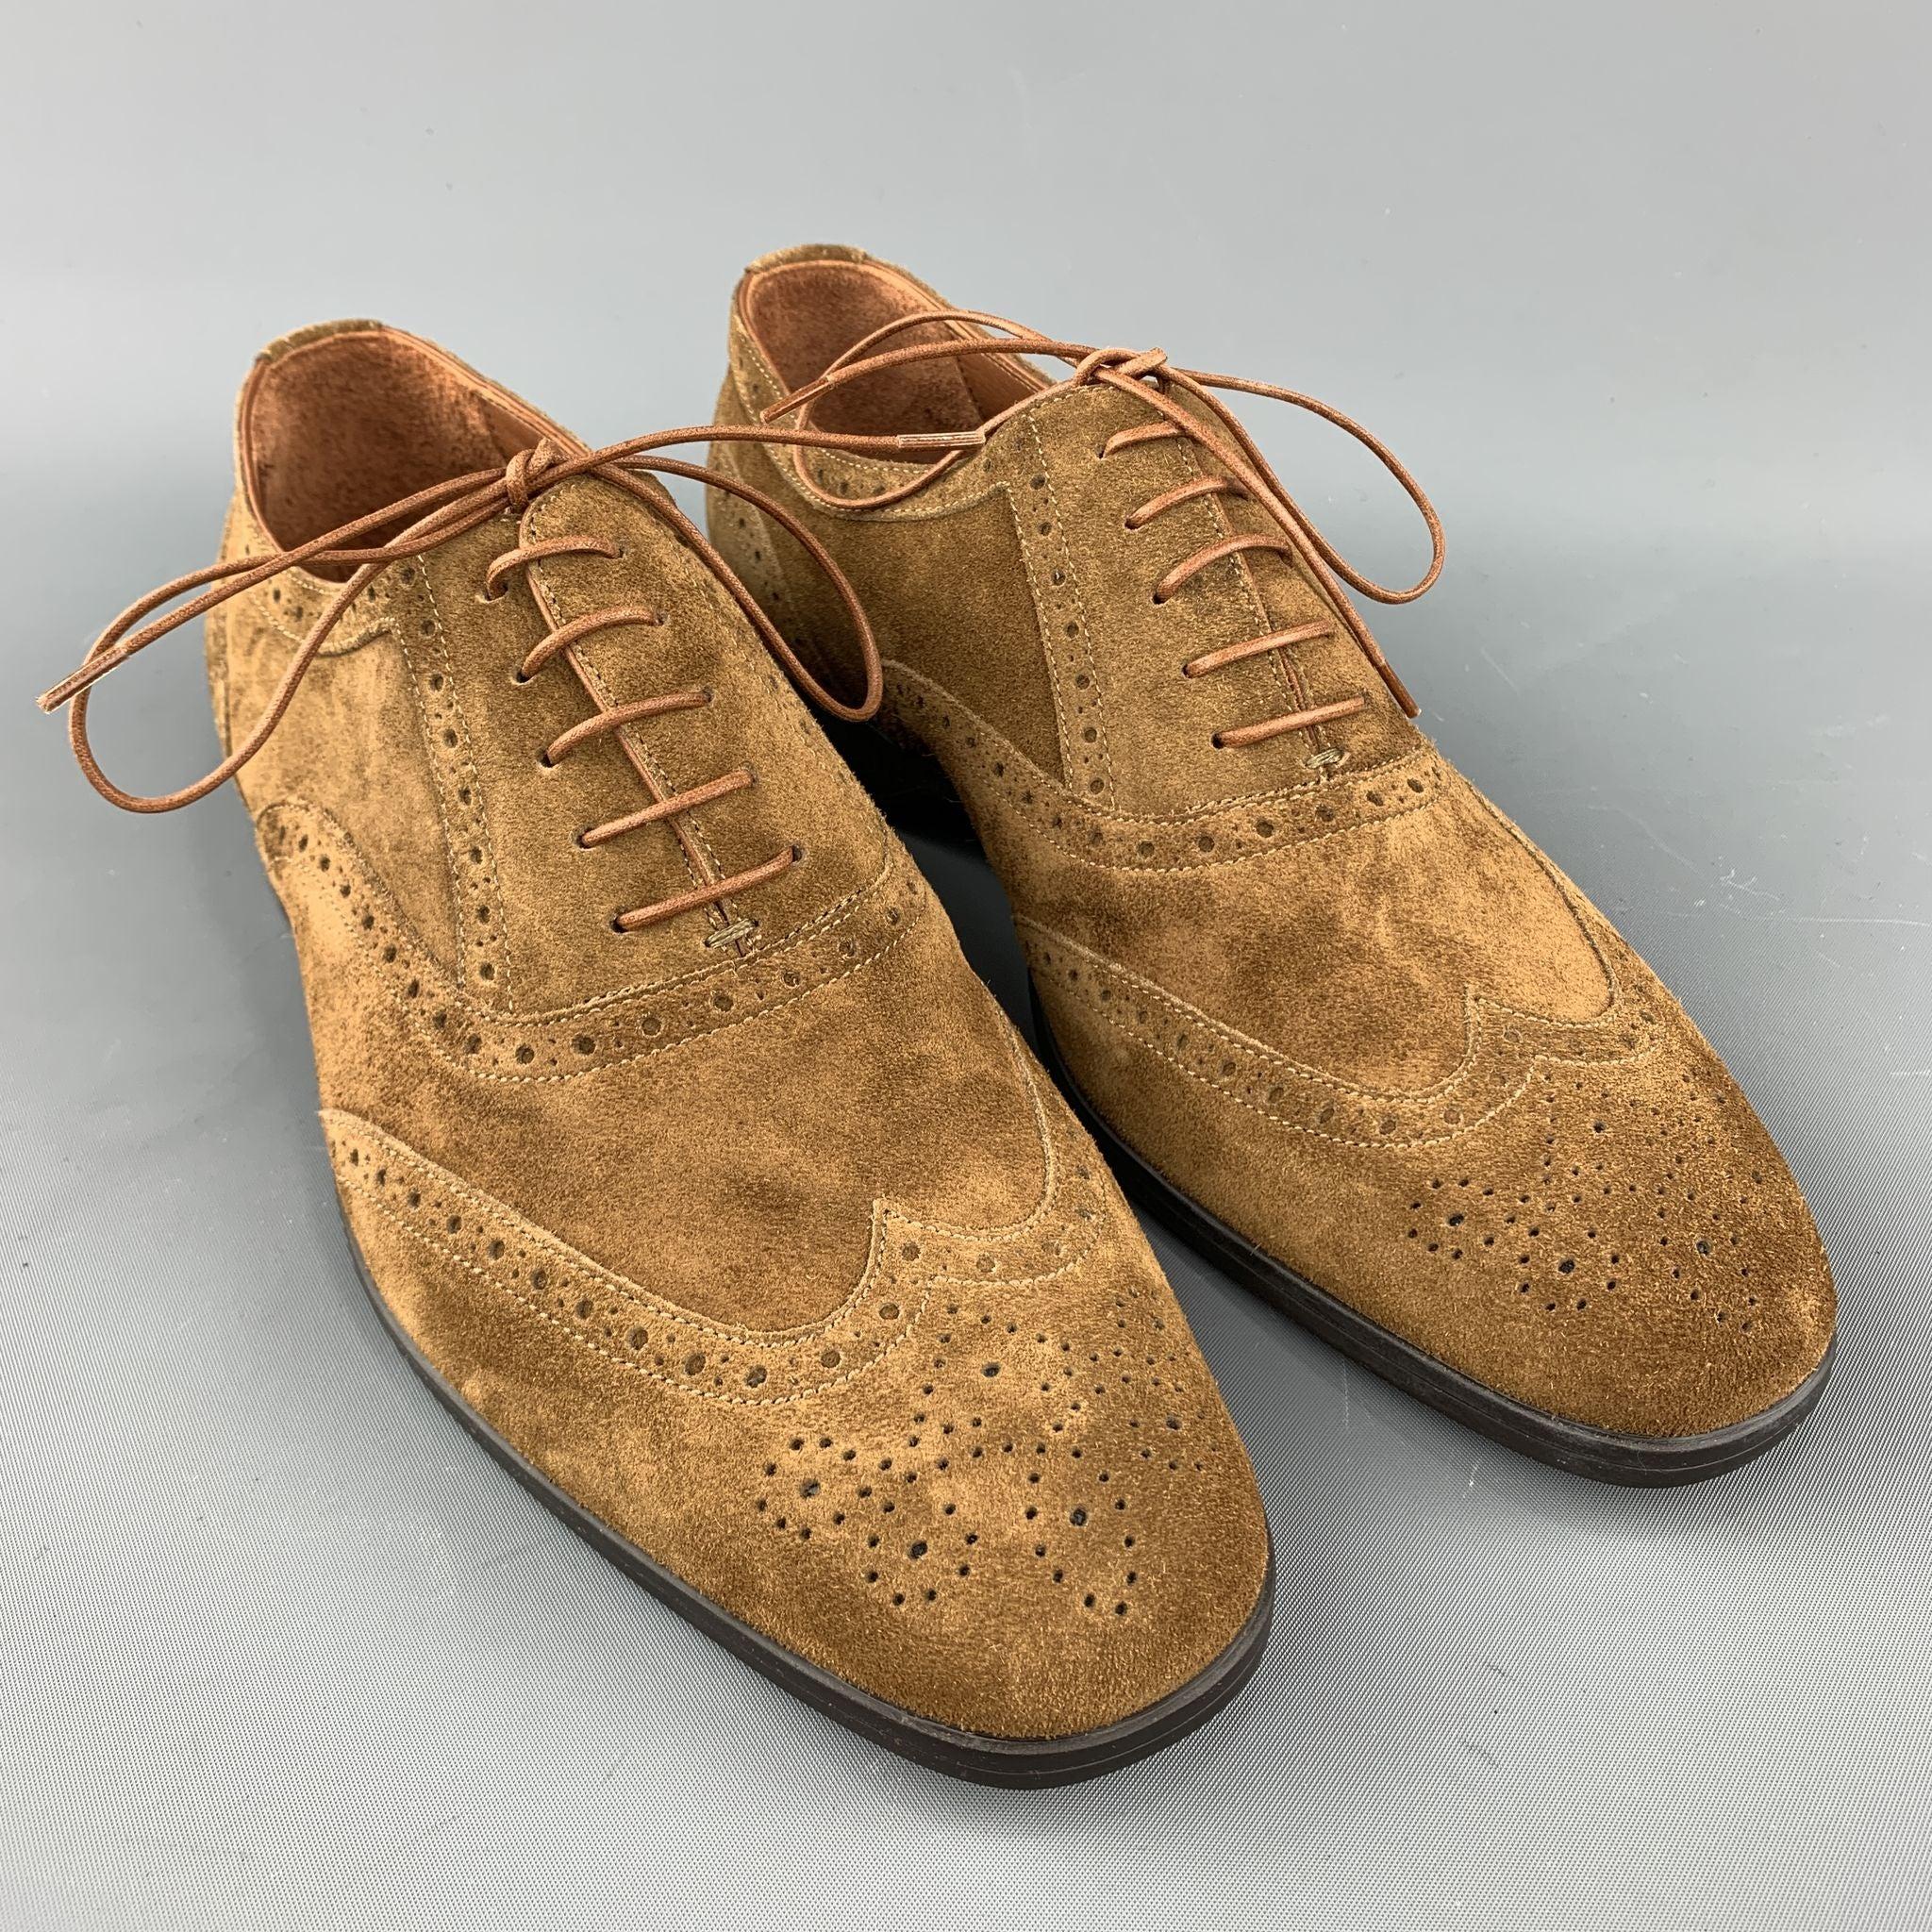 RALPH LAUREN lace up shoes comes in brown perforated suede featuring a wingtip style and a rubber sole. Made in Italy.New With Box. 

Marked:   8 

Measurements: 
  Outsole: 11 inches  x 4 inches 
  
  
 
Reference: 97099
Category: Lace Up